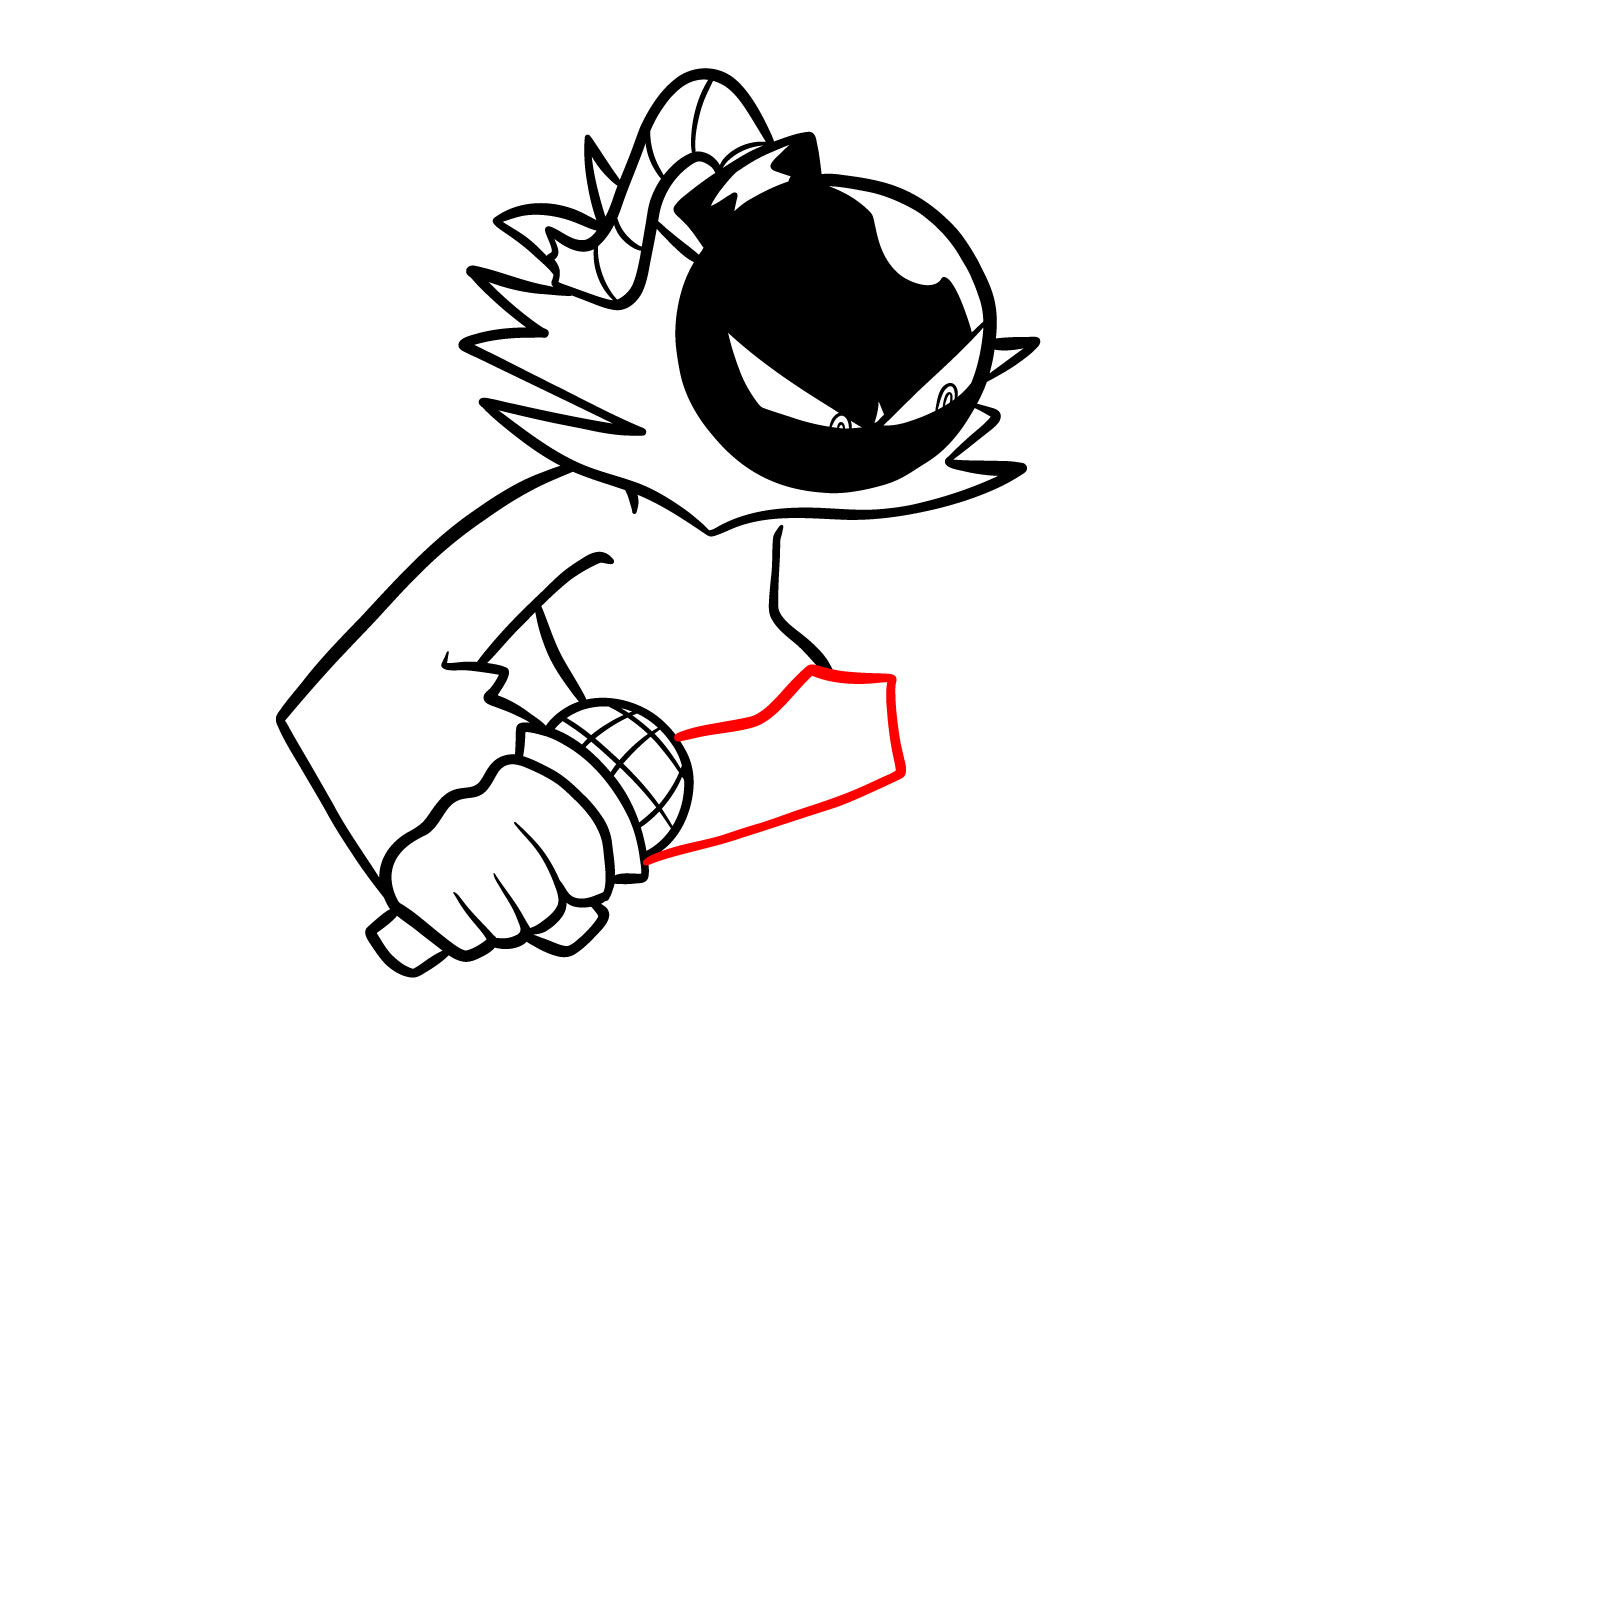 How to draw Aside Whitty from FNF Funkin' Aside mod - step 18